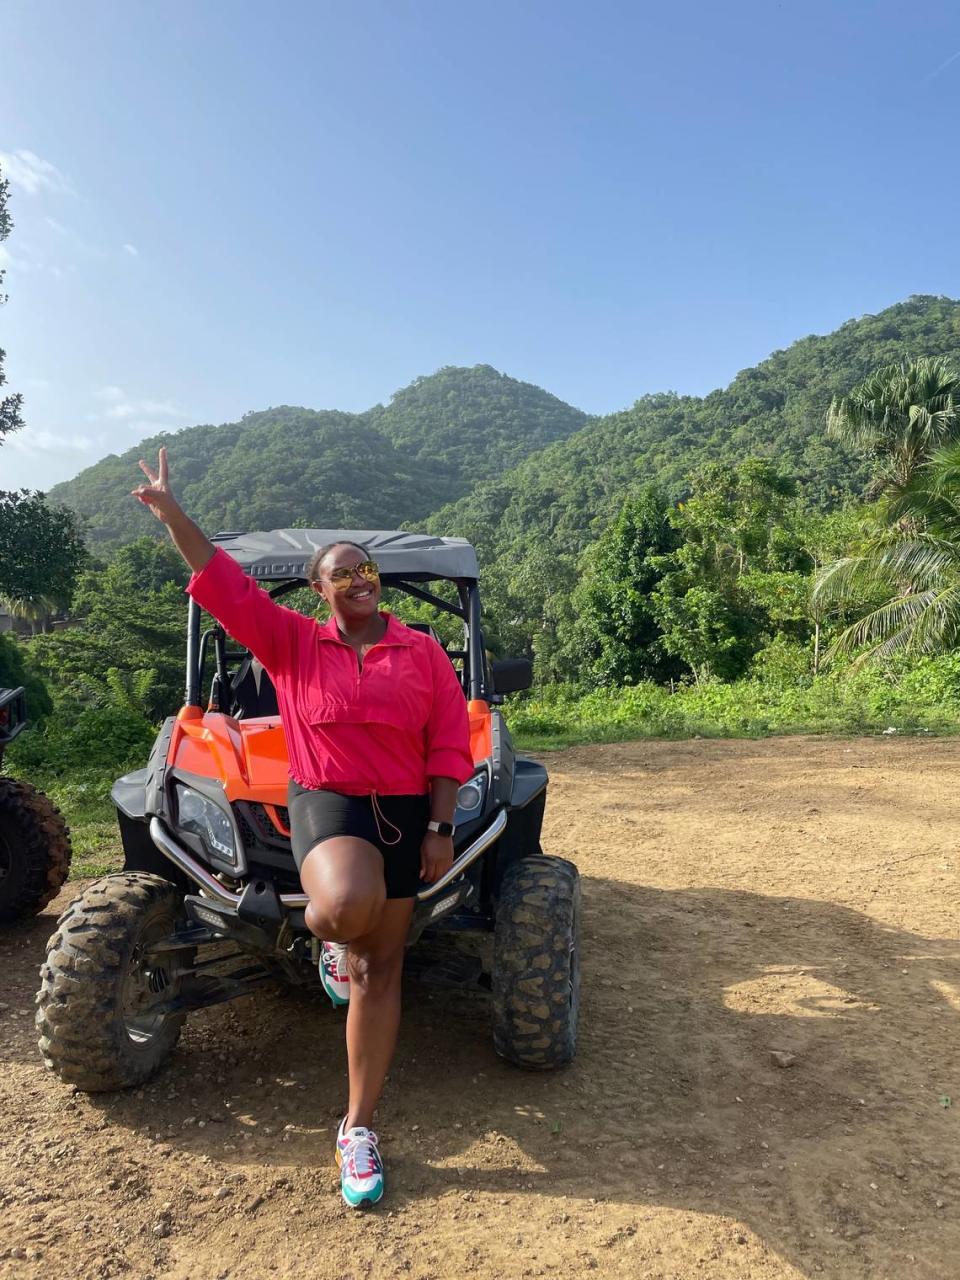 CharlotteFive’s DeAnna Taylor does the RastaSafari Experience in Westmoreland, about an hour and a half from Montego Bay, Jamaica.